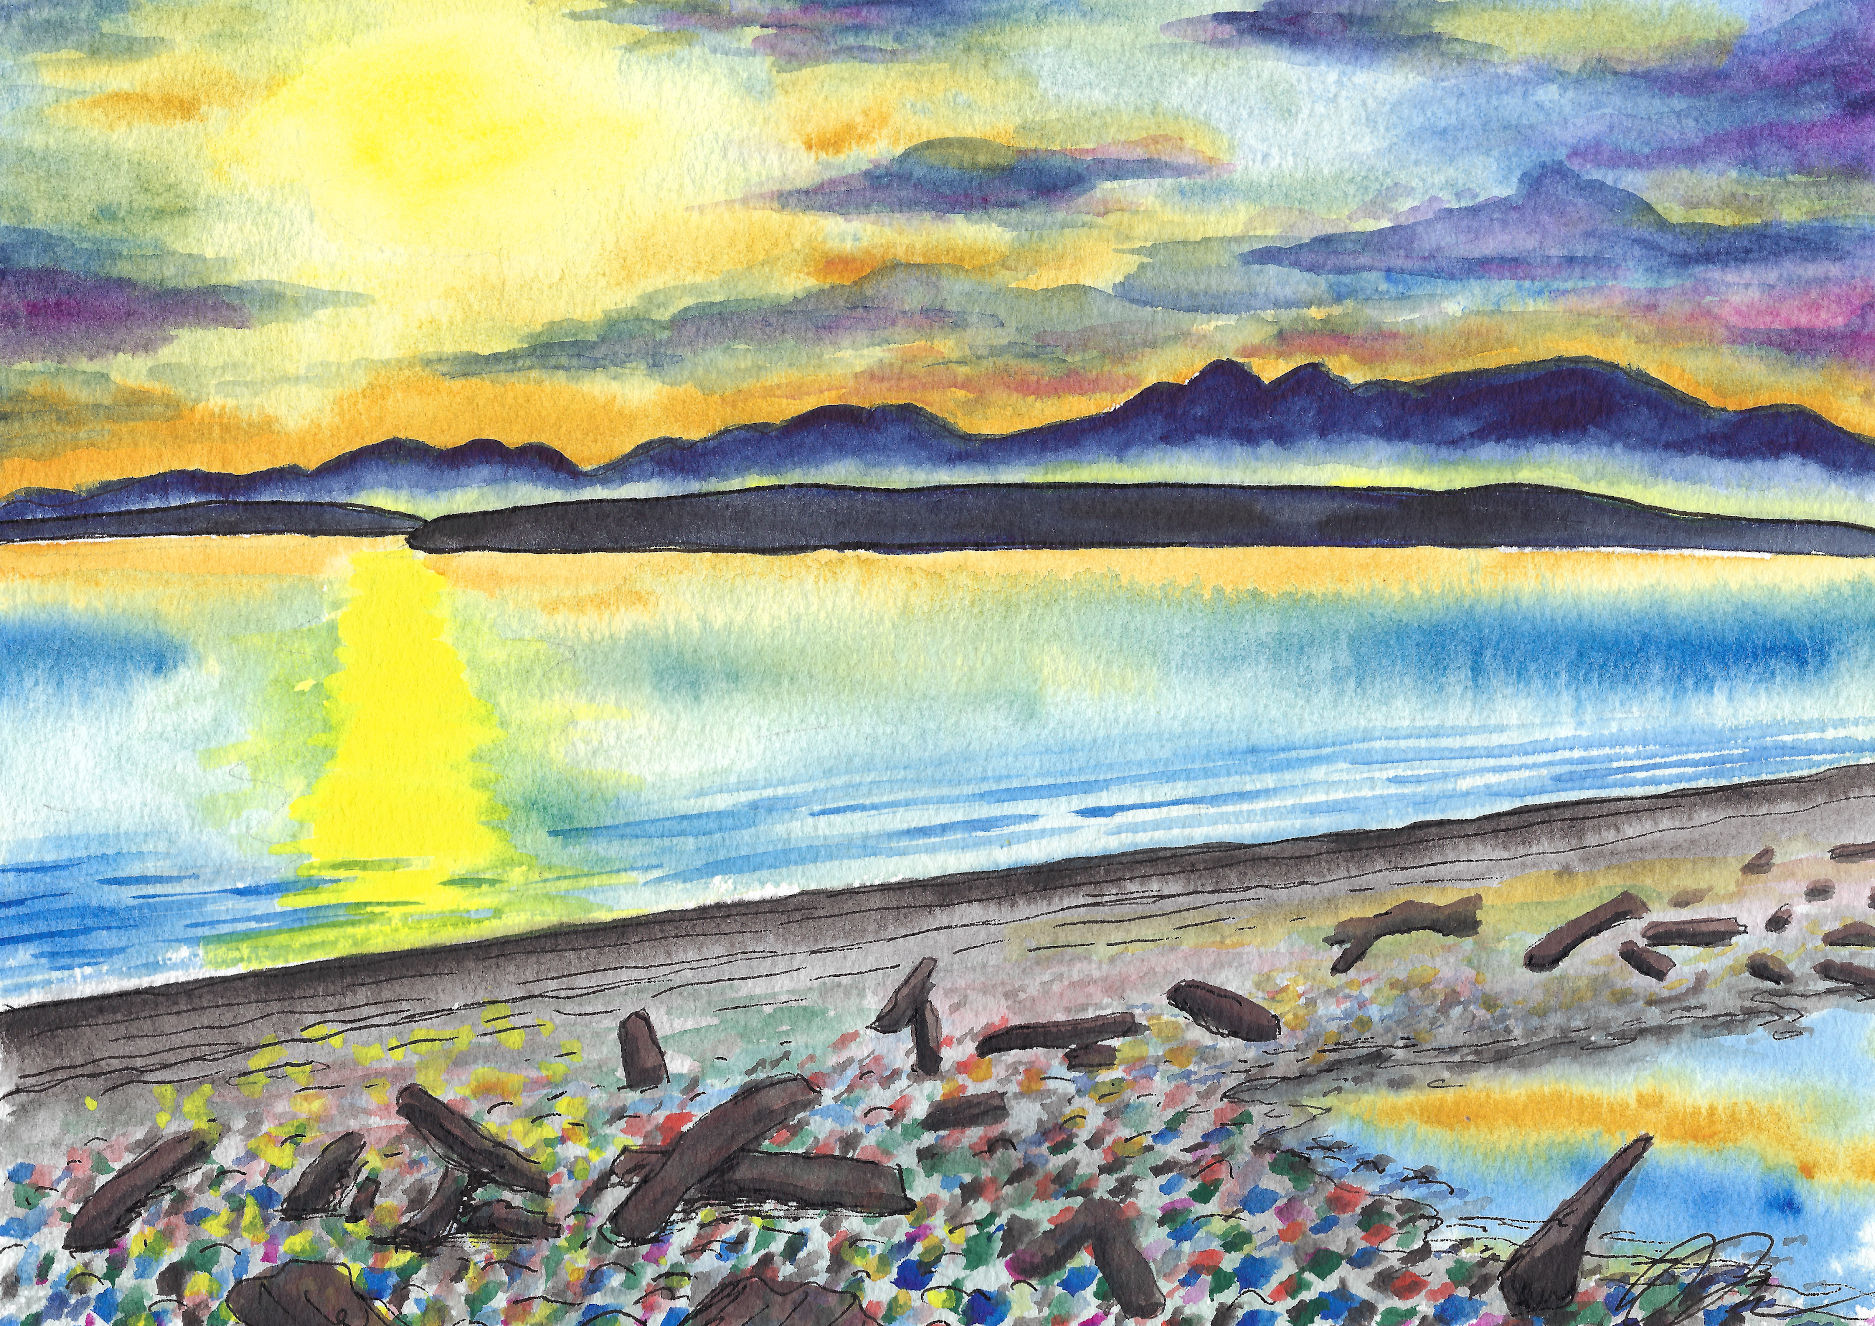 Watercolor painting of Whidbey Island in Washington State